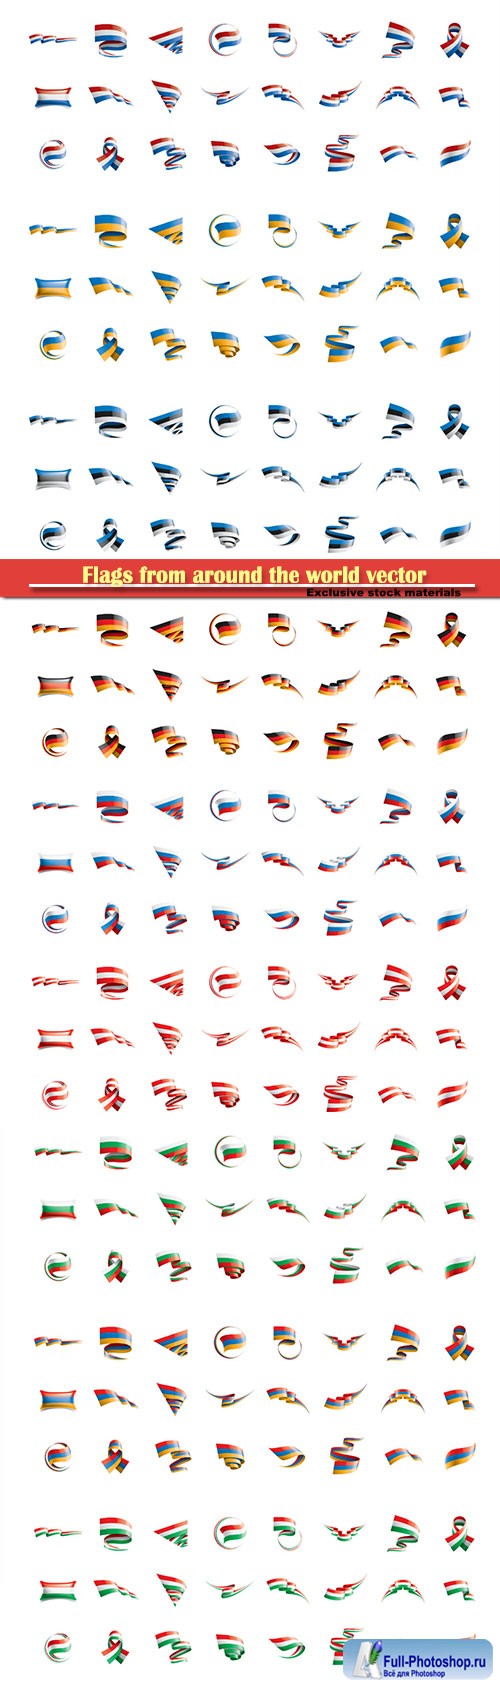 Flags from around the world vector illustration